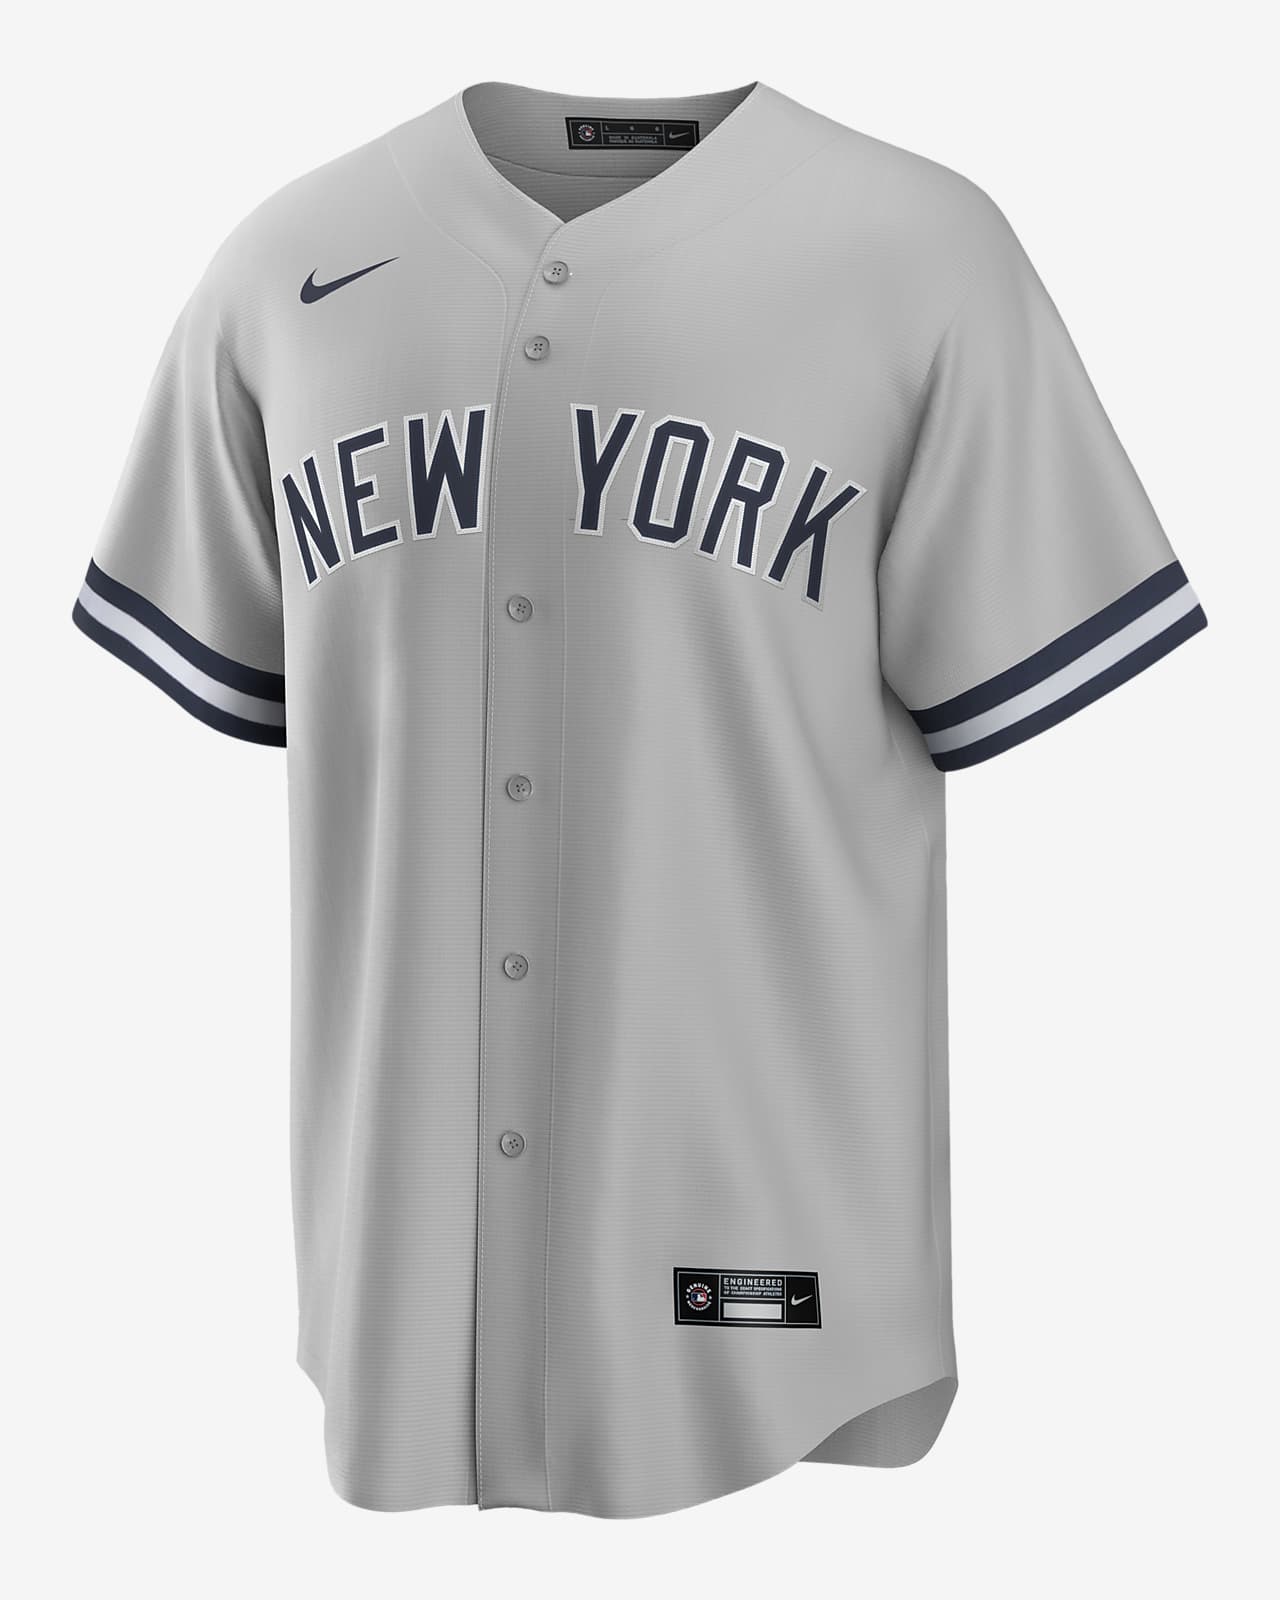 Nike MLB Authentic & Replica Jersey Sizing! 